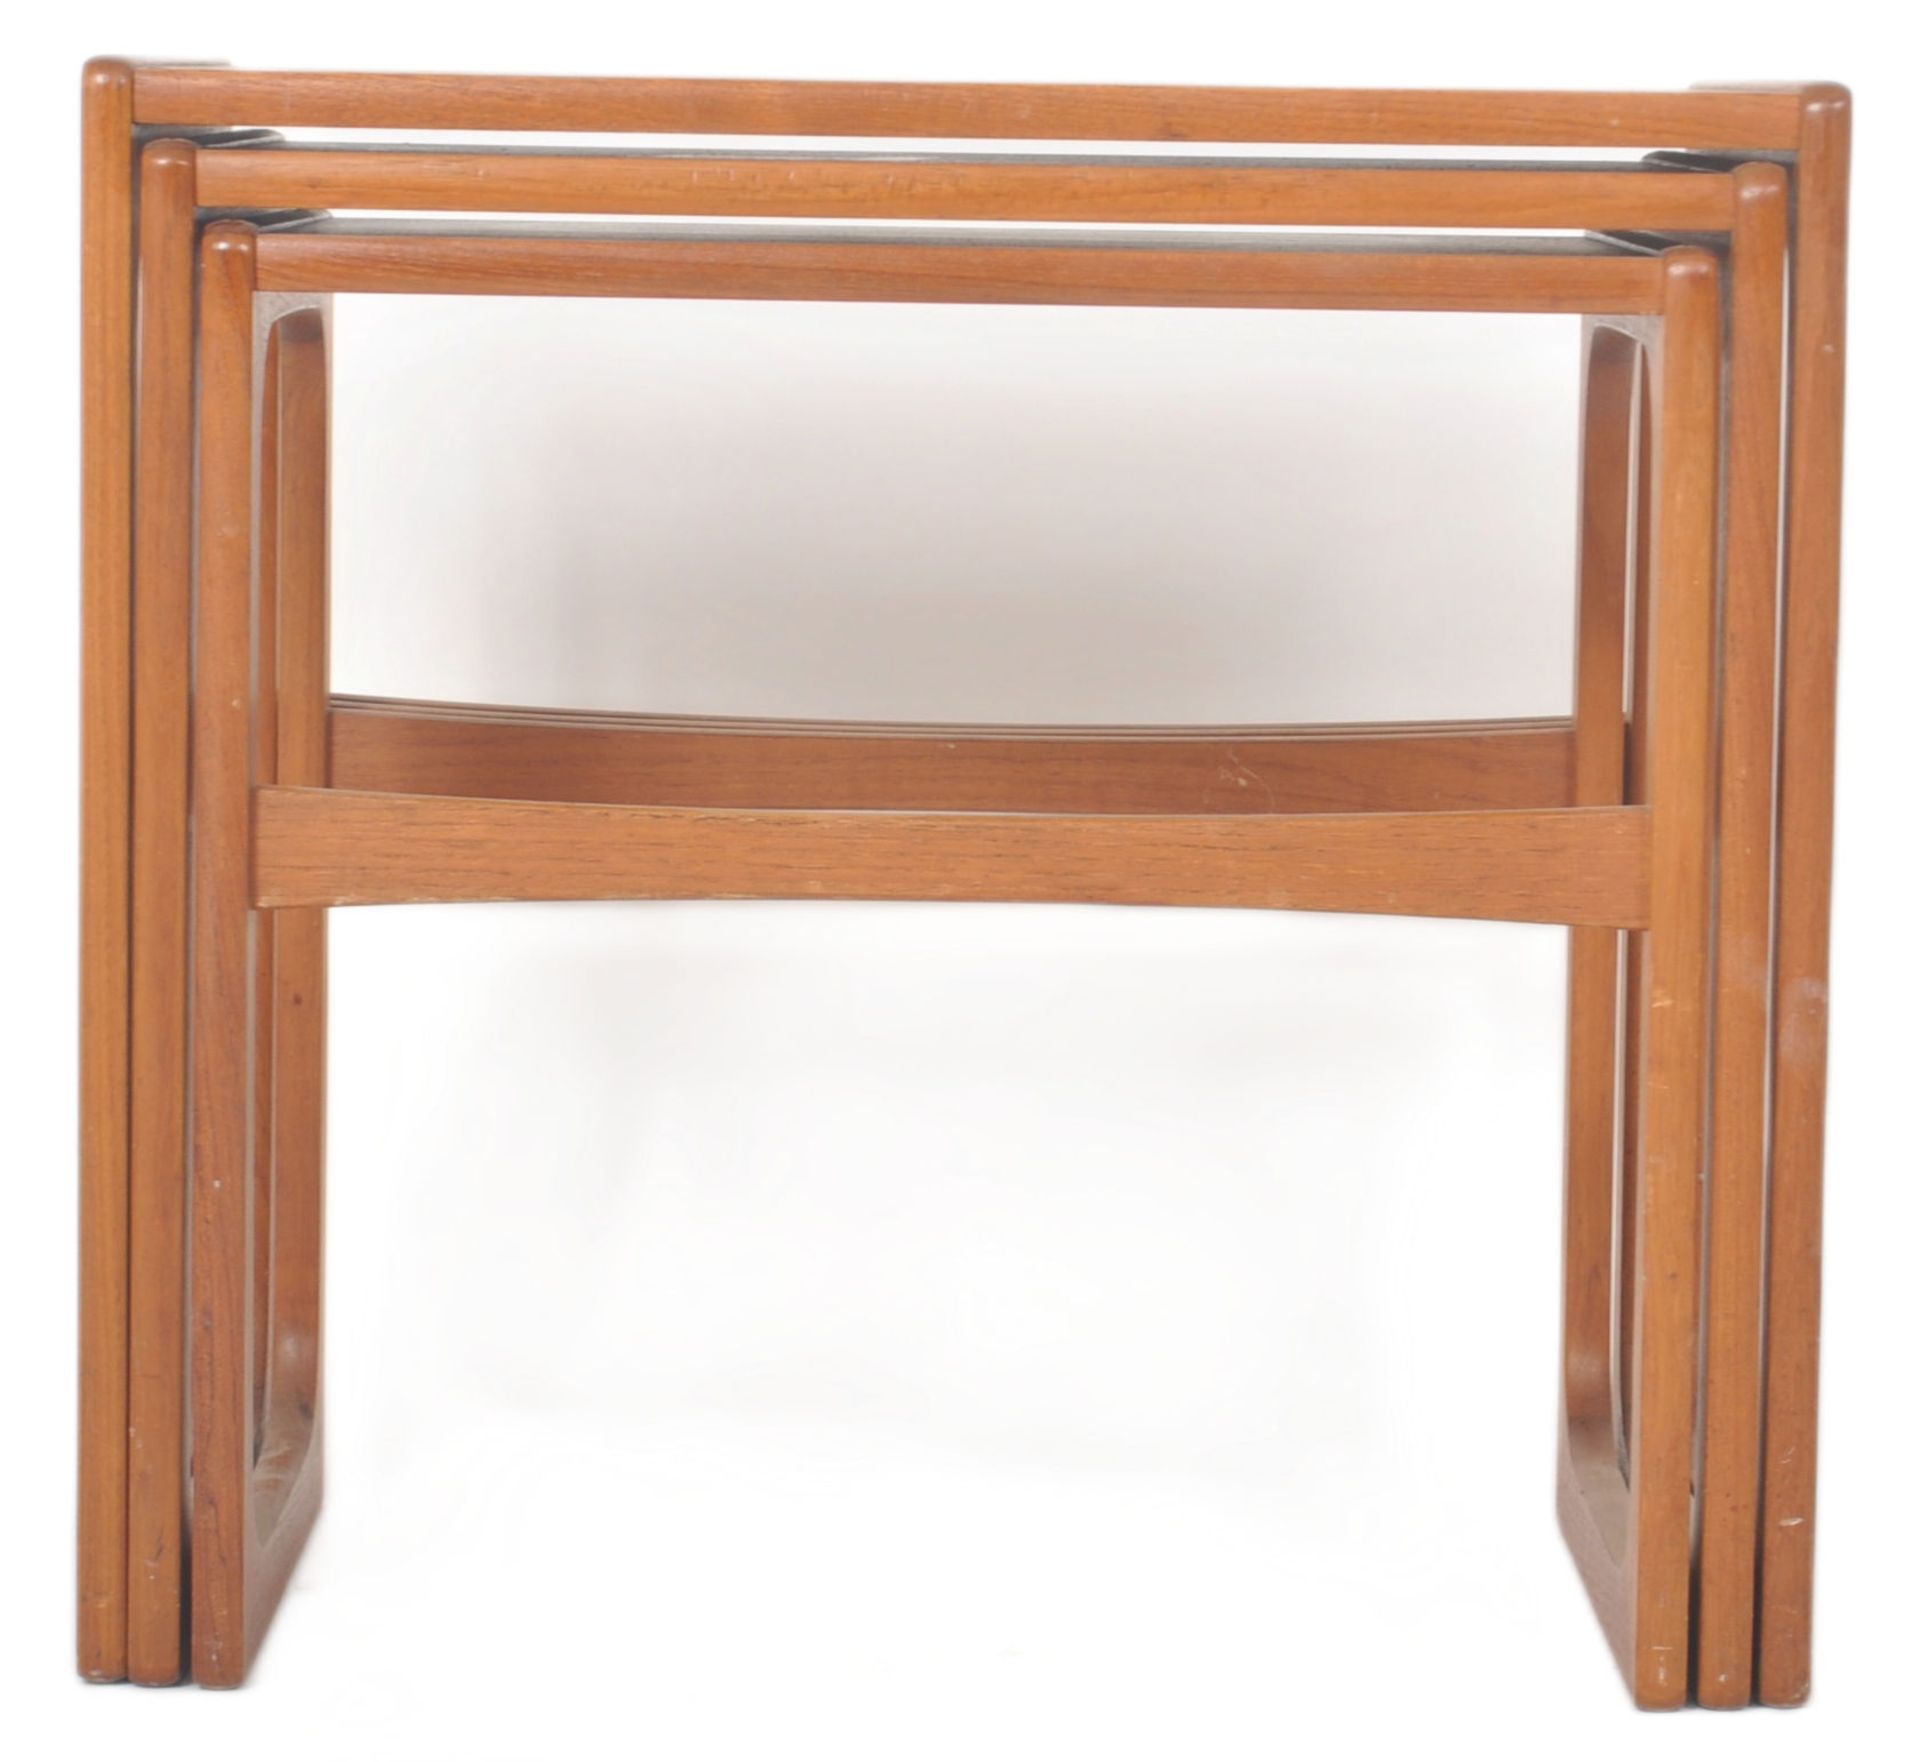 BR GELSTED - DANISH MID CENTURY TEAK NEST OF TABLES - Image 2 of 8